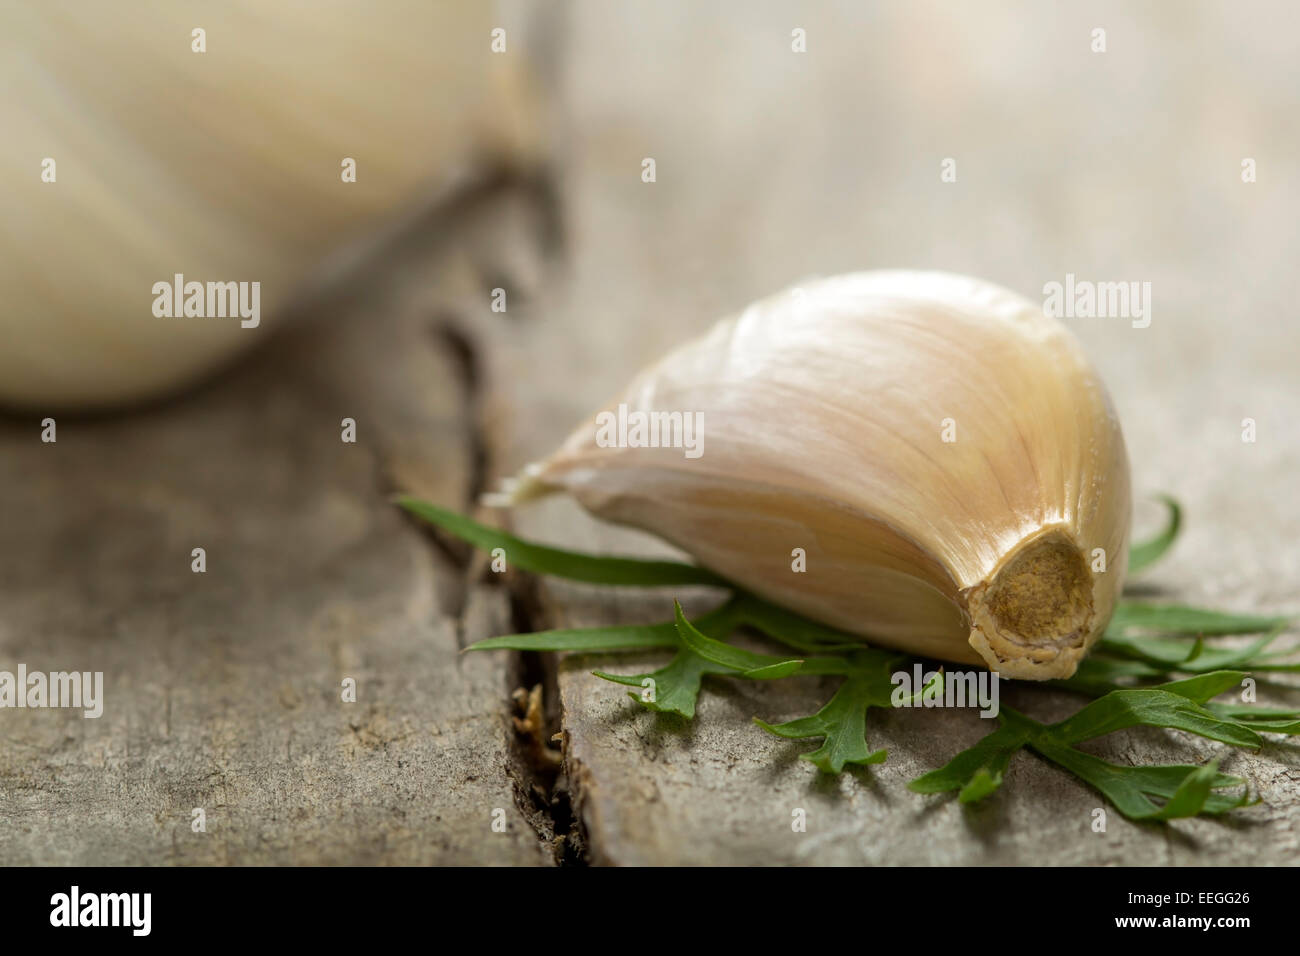 Garlic bulb and cloves over wood background Stock Photo